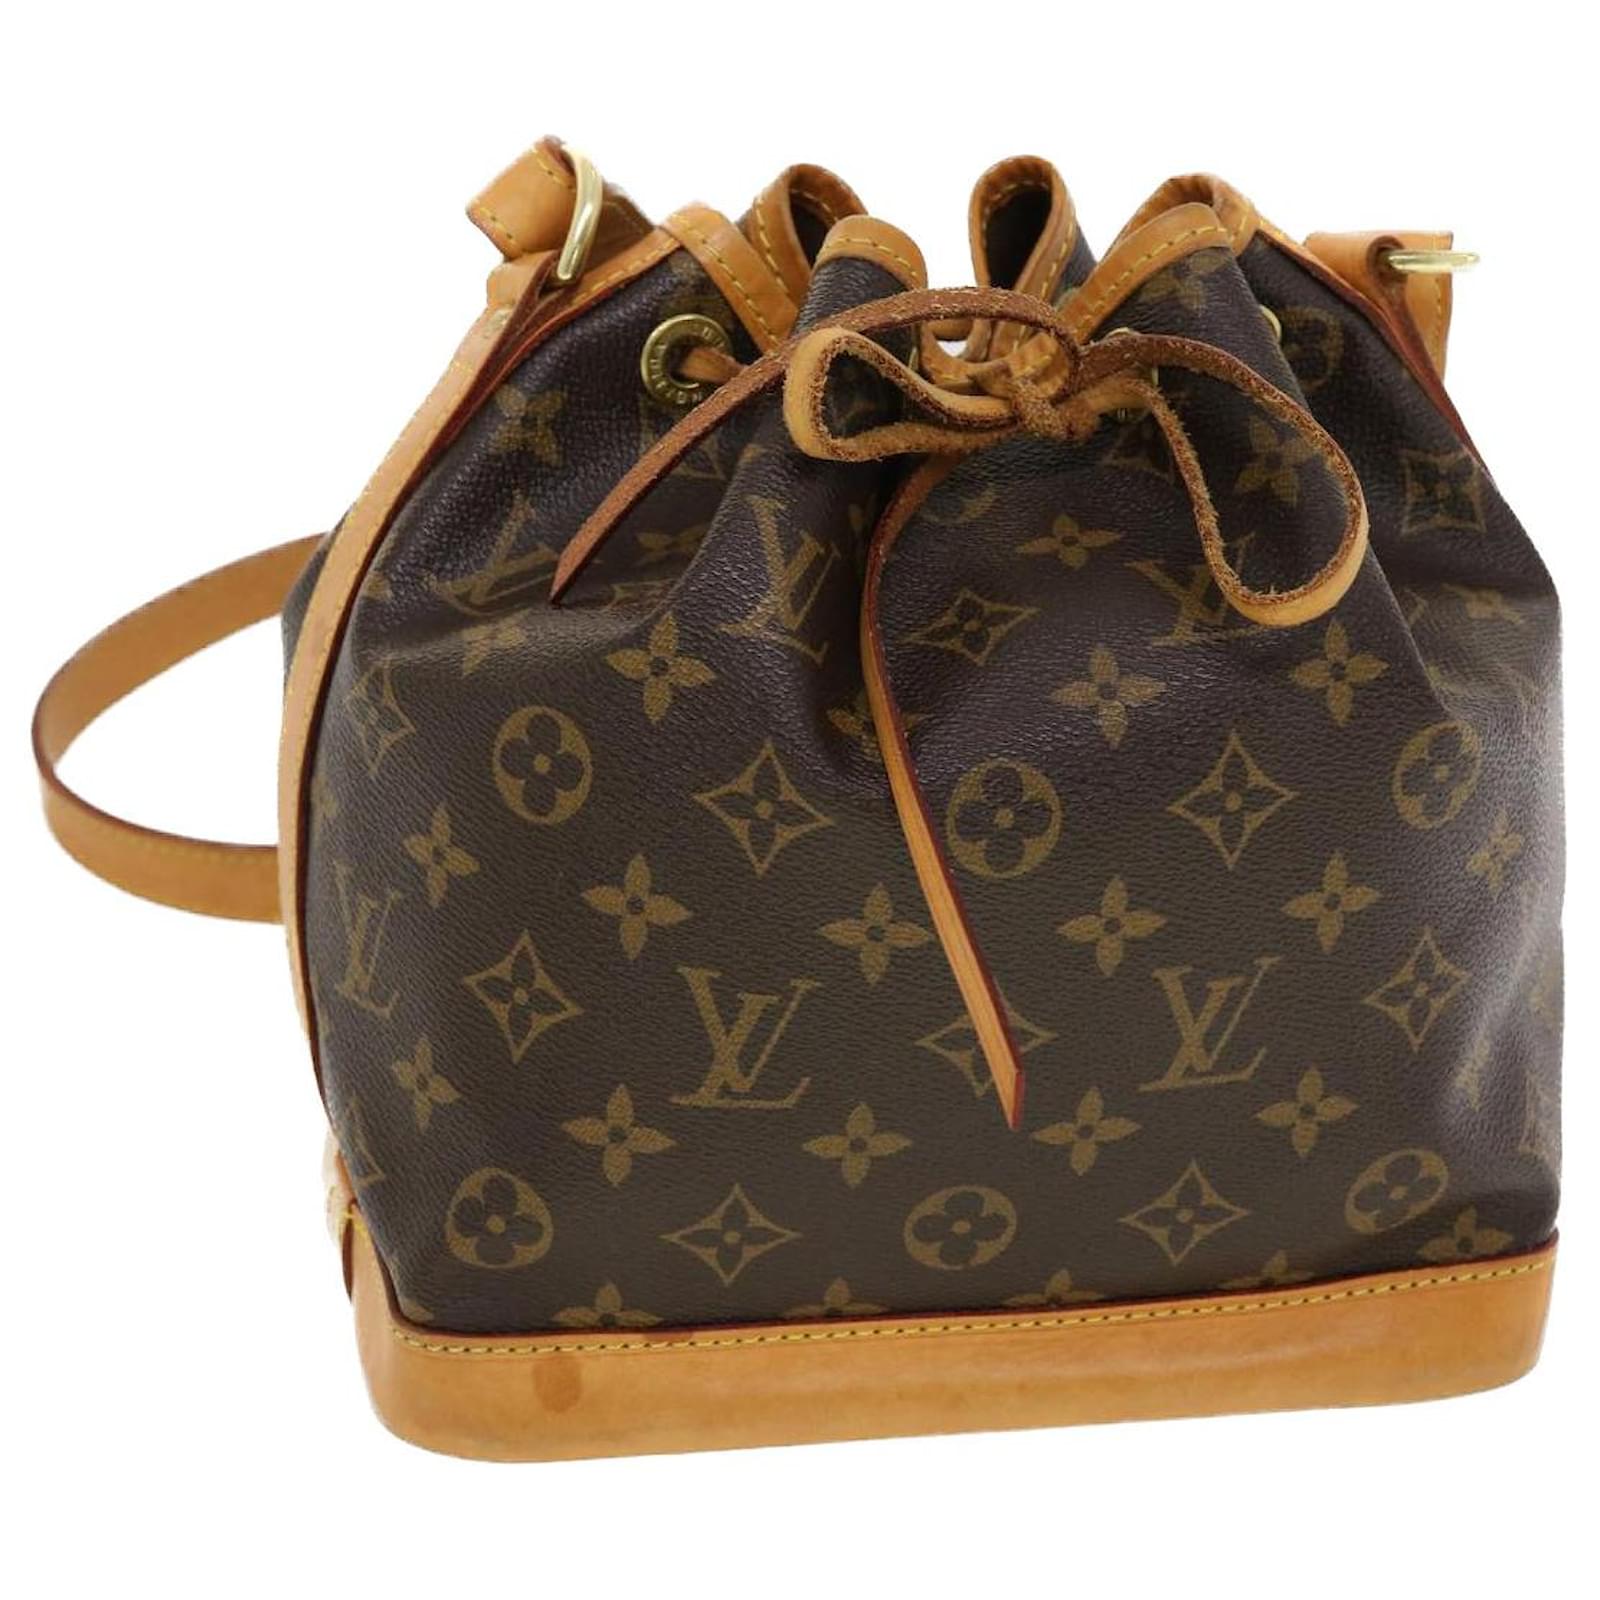 Bag and Purse Organizer with Regular Style for Louis Vuitton Petit NOE, NOE  BB and NOE